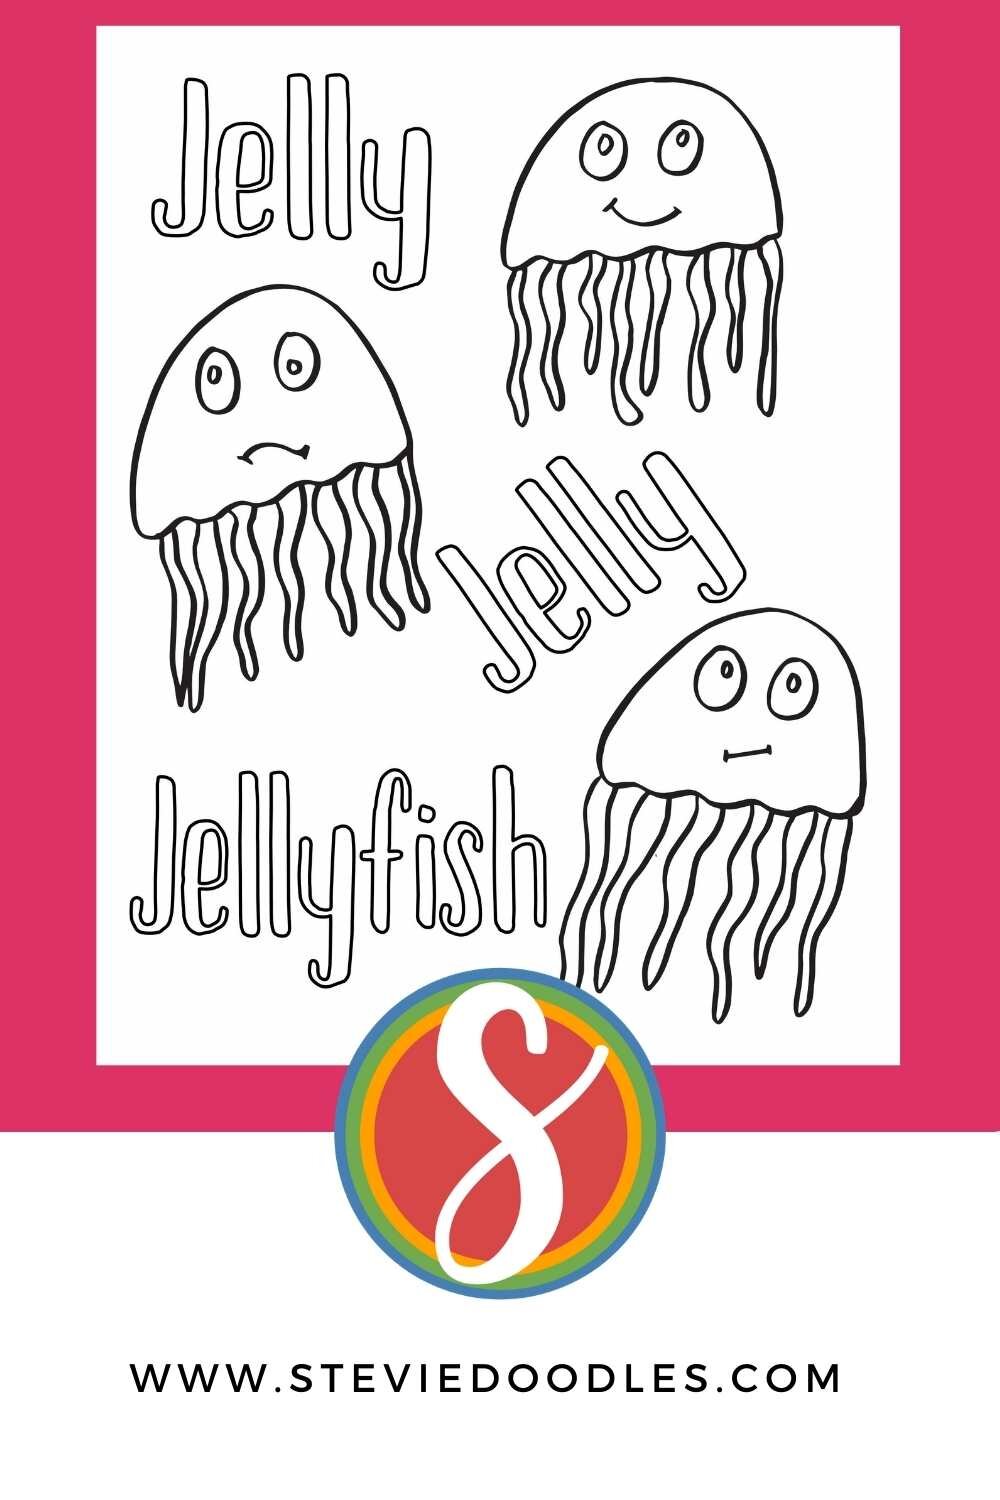 three colorable jellyfish with big eyes, and the colorable text "jelly jelly jellyfish"